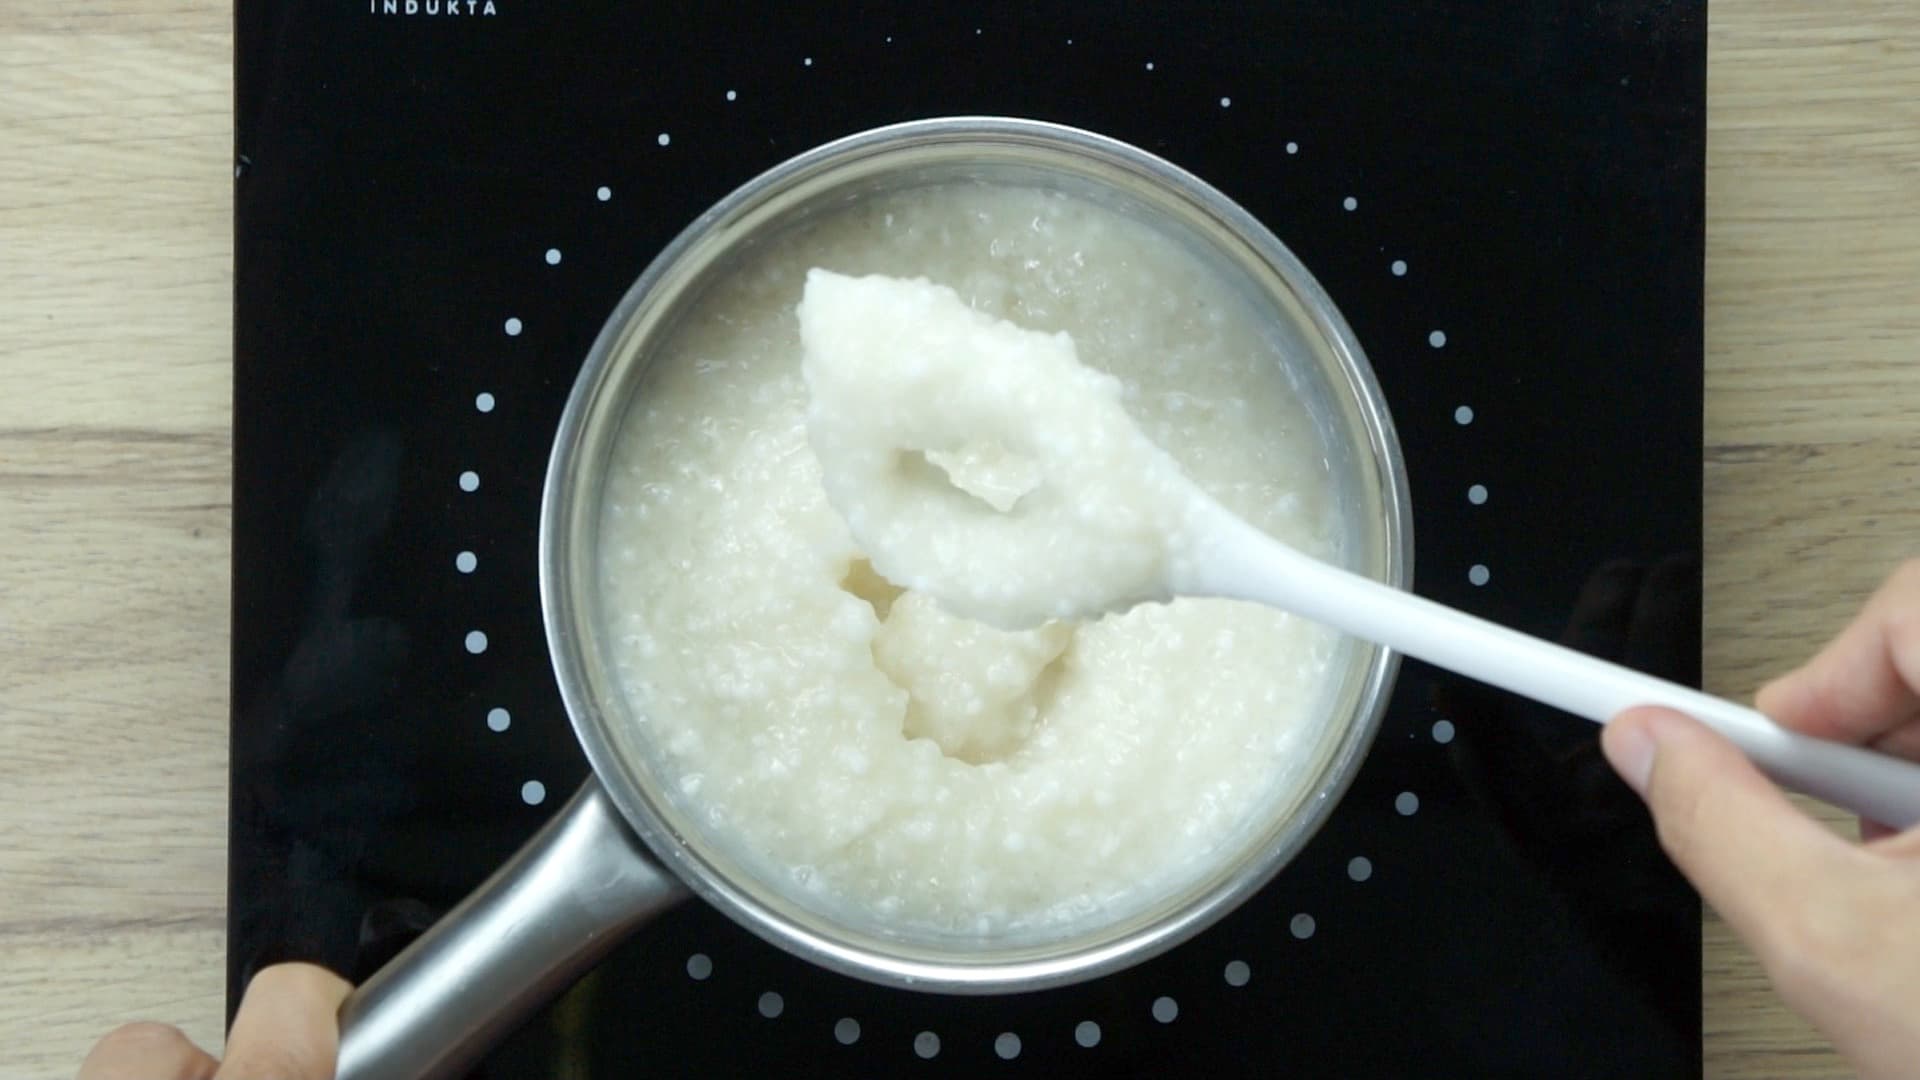 A saucepan on an induction hot plate with a thick white liquid (milk) and small pearls.